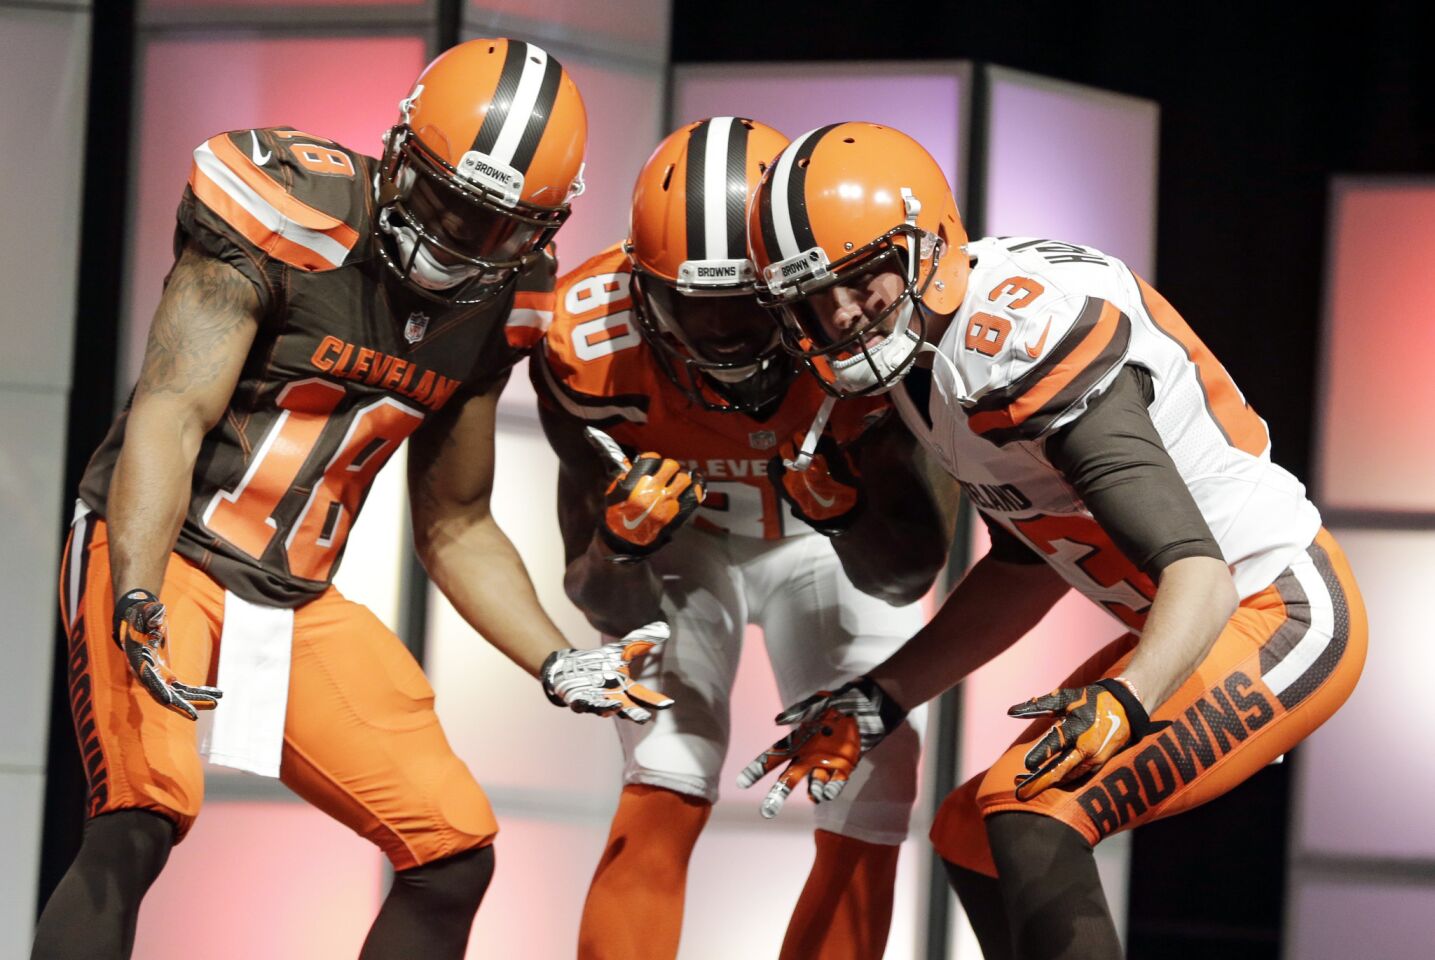 Browns receivers Taylor Gabriel, left, Dwayne Bowe and Brian Hartline model Cleveland's new uniforms designed by Nike for the 2015 season and beyond.